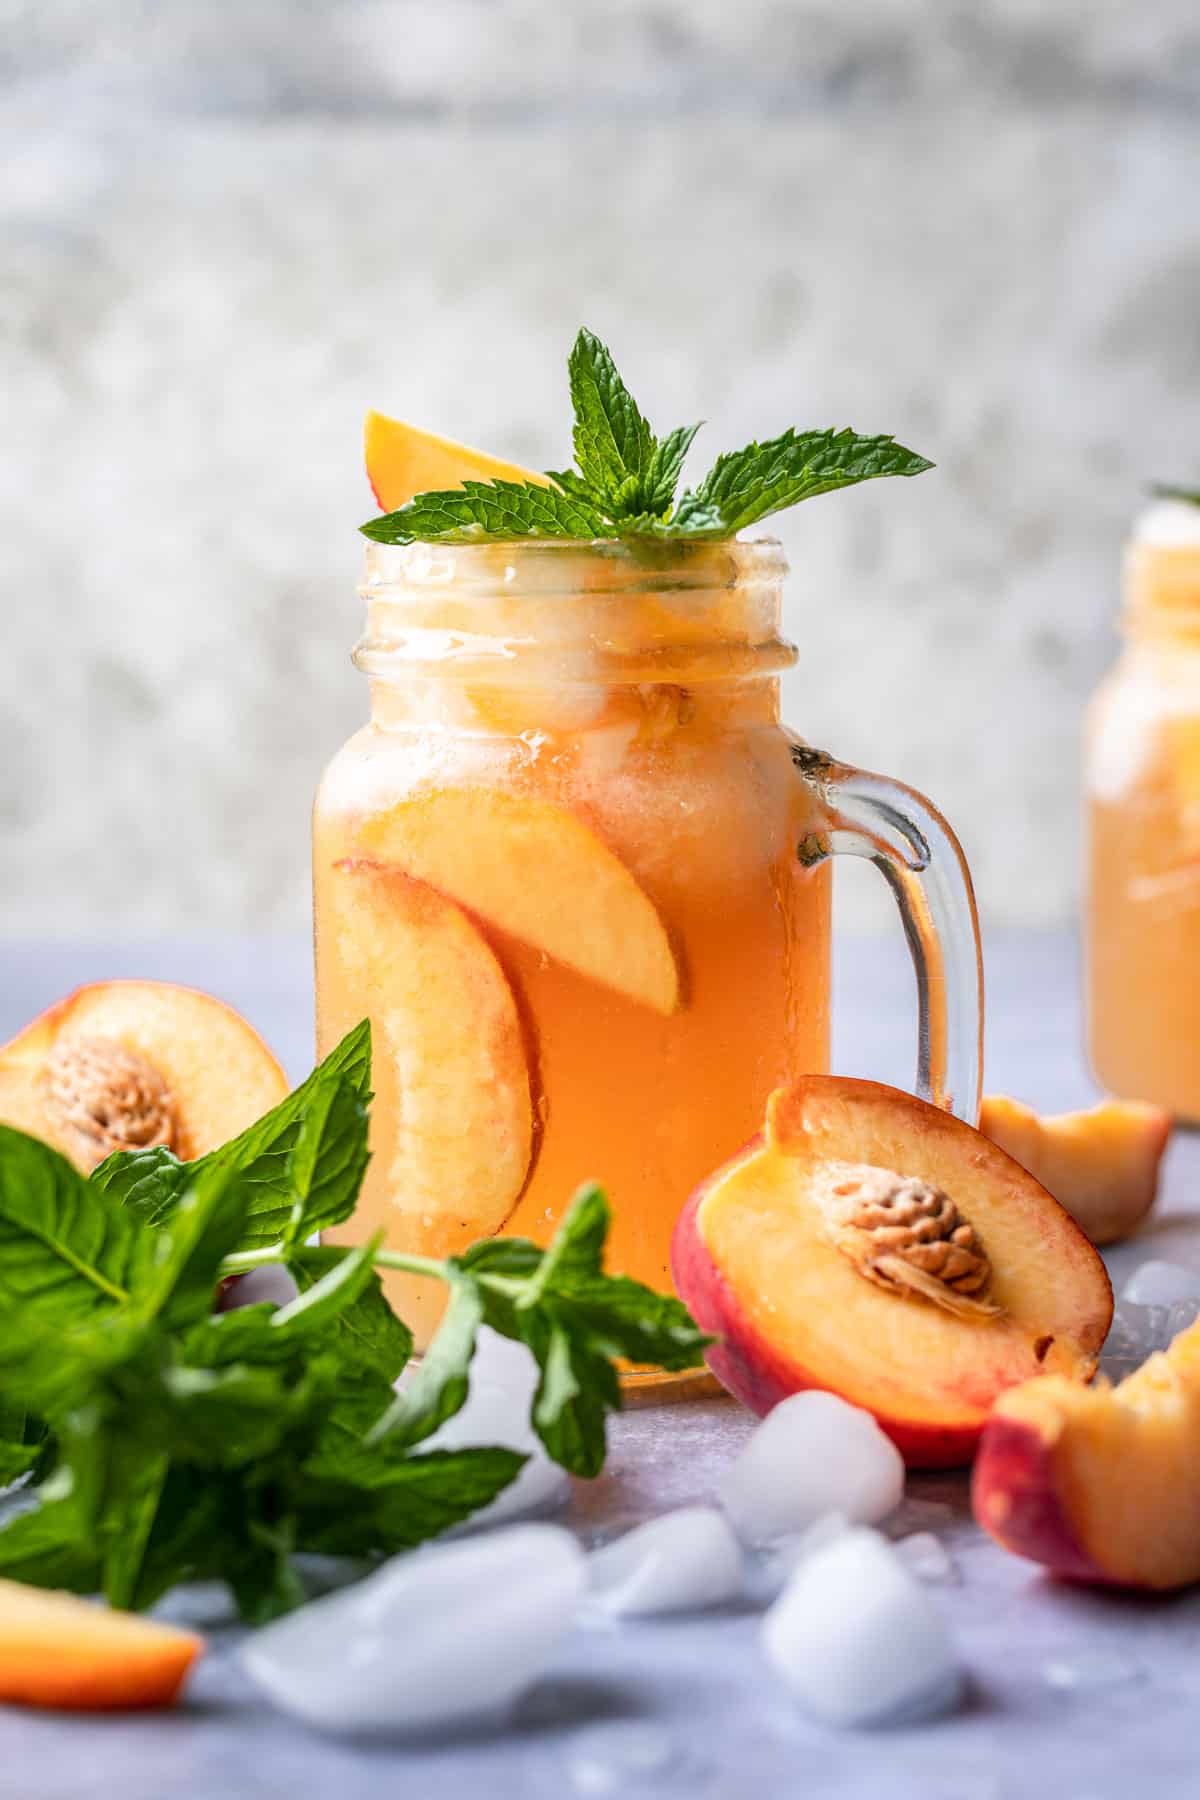 Bourbon peach smash in a glass garnished with fresh mint and peach slices.